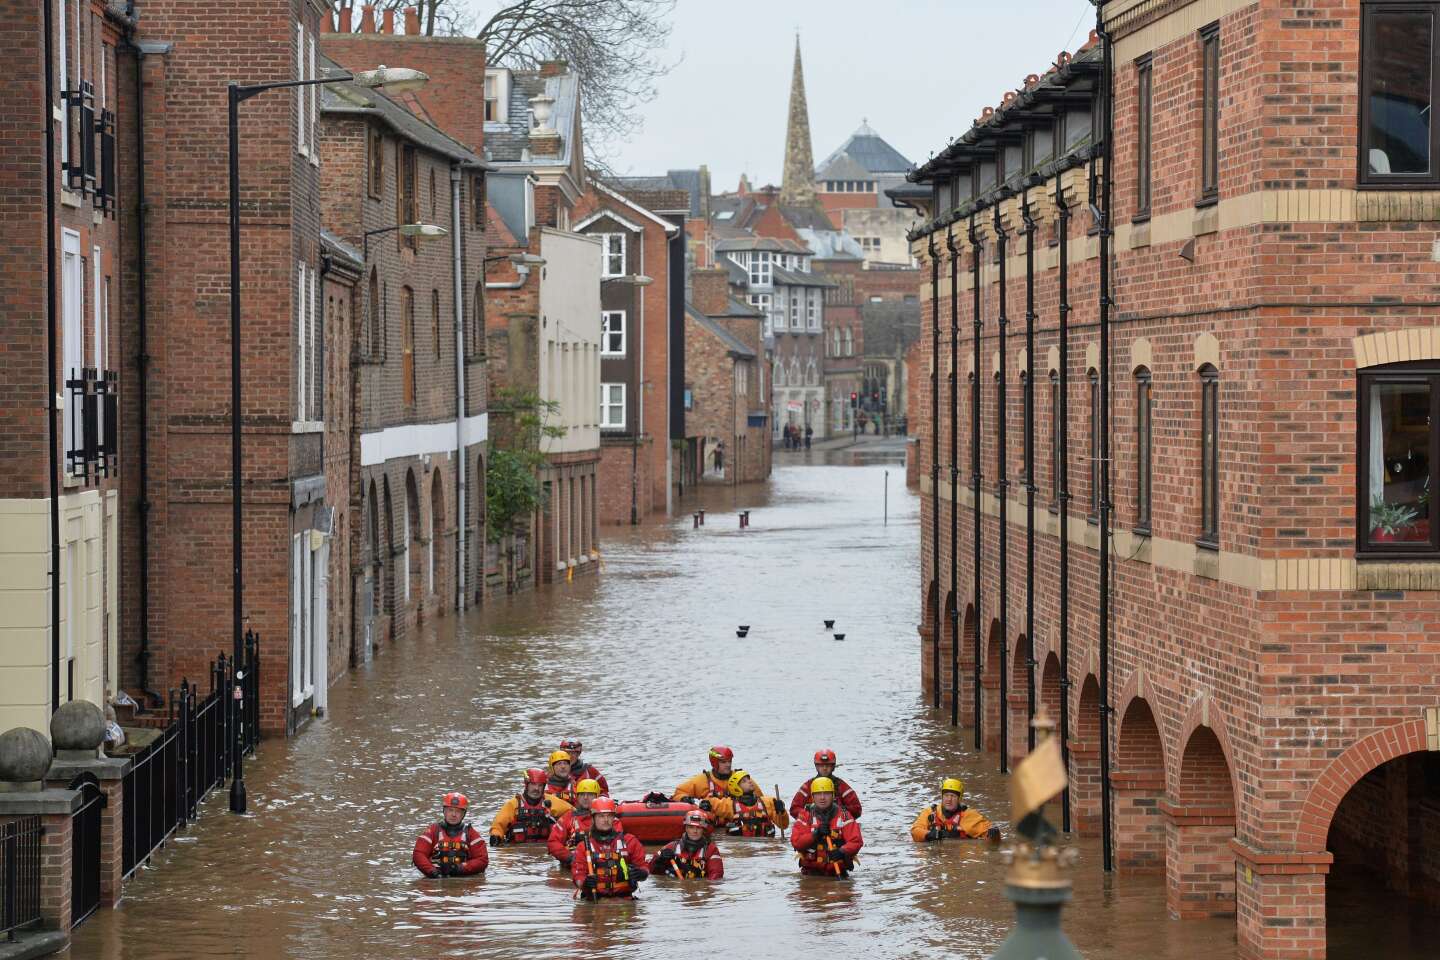 “Currently one in six properties in England are at risk of flooding”